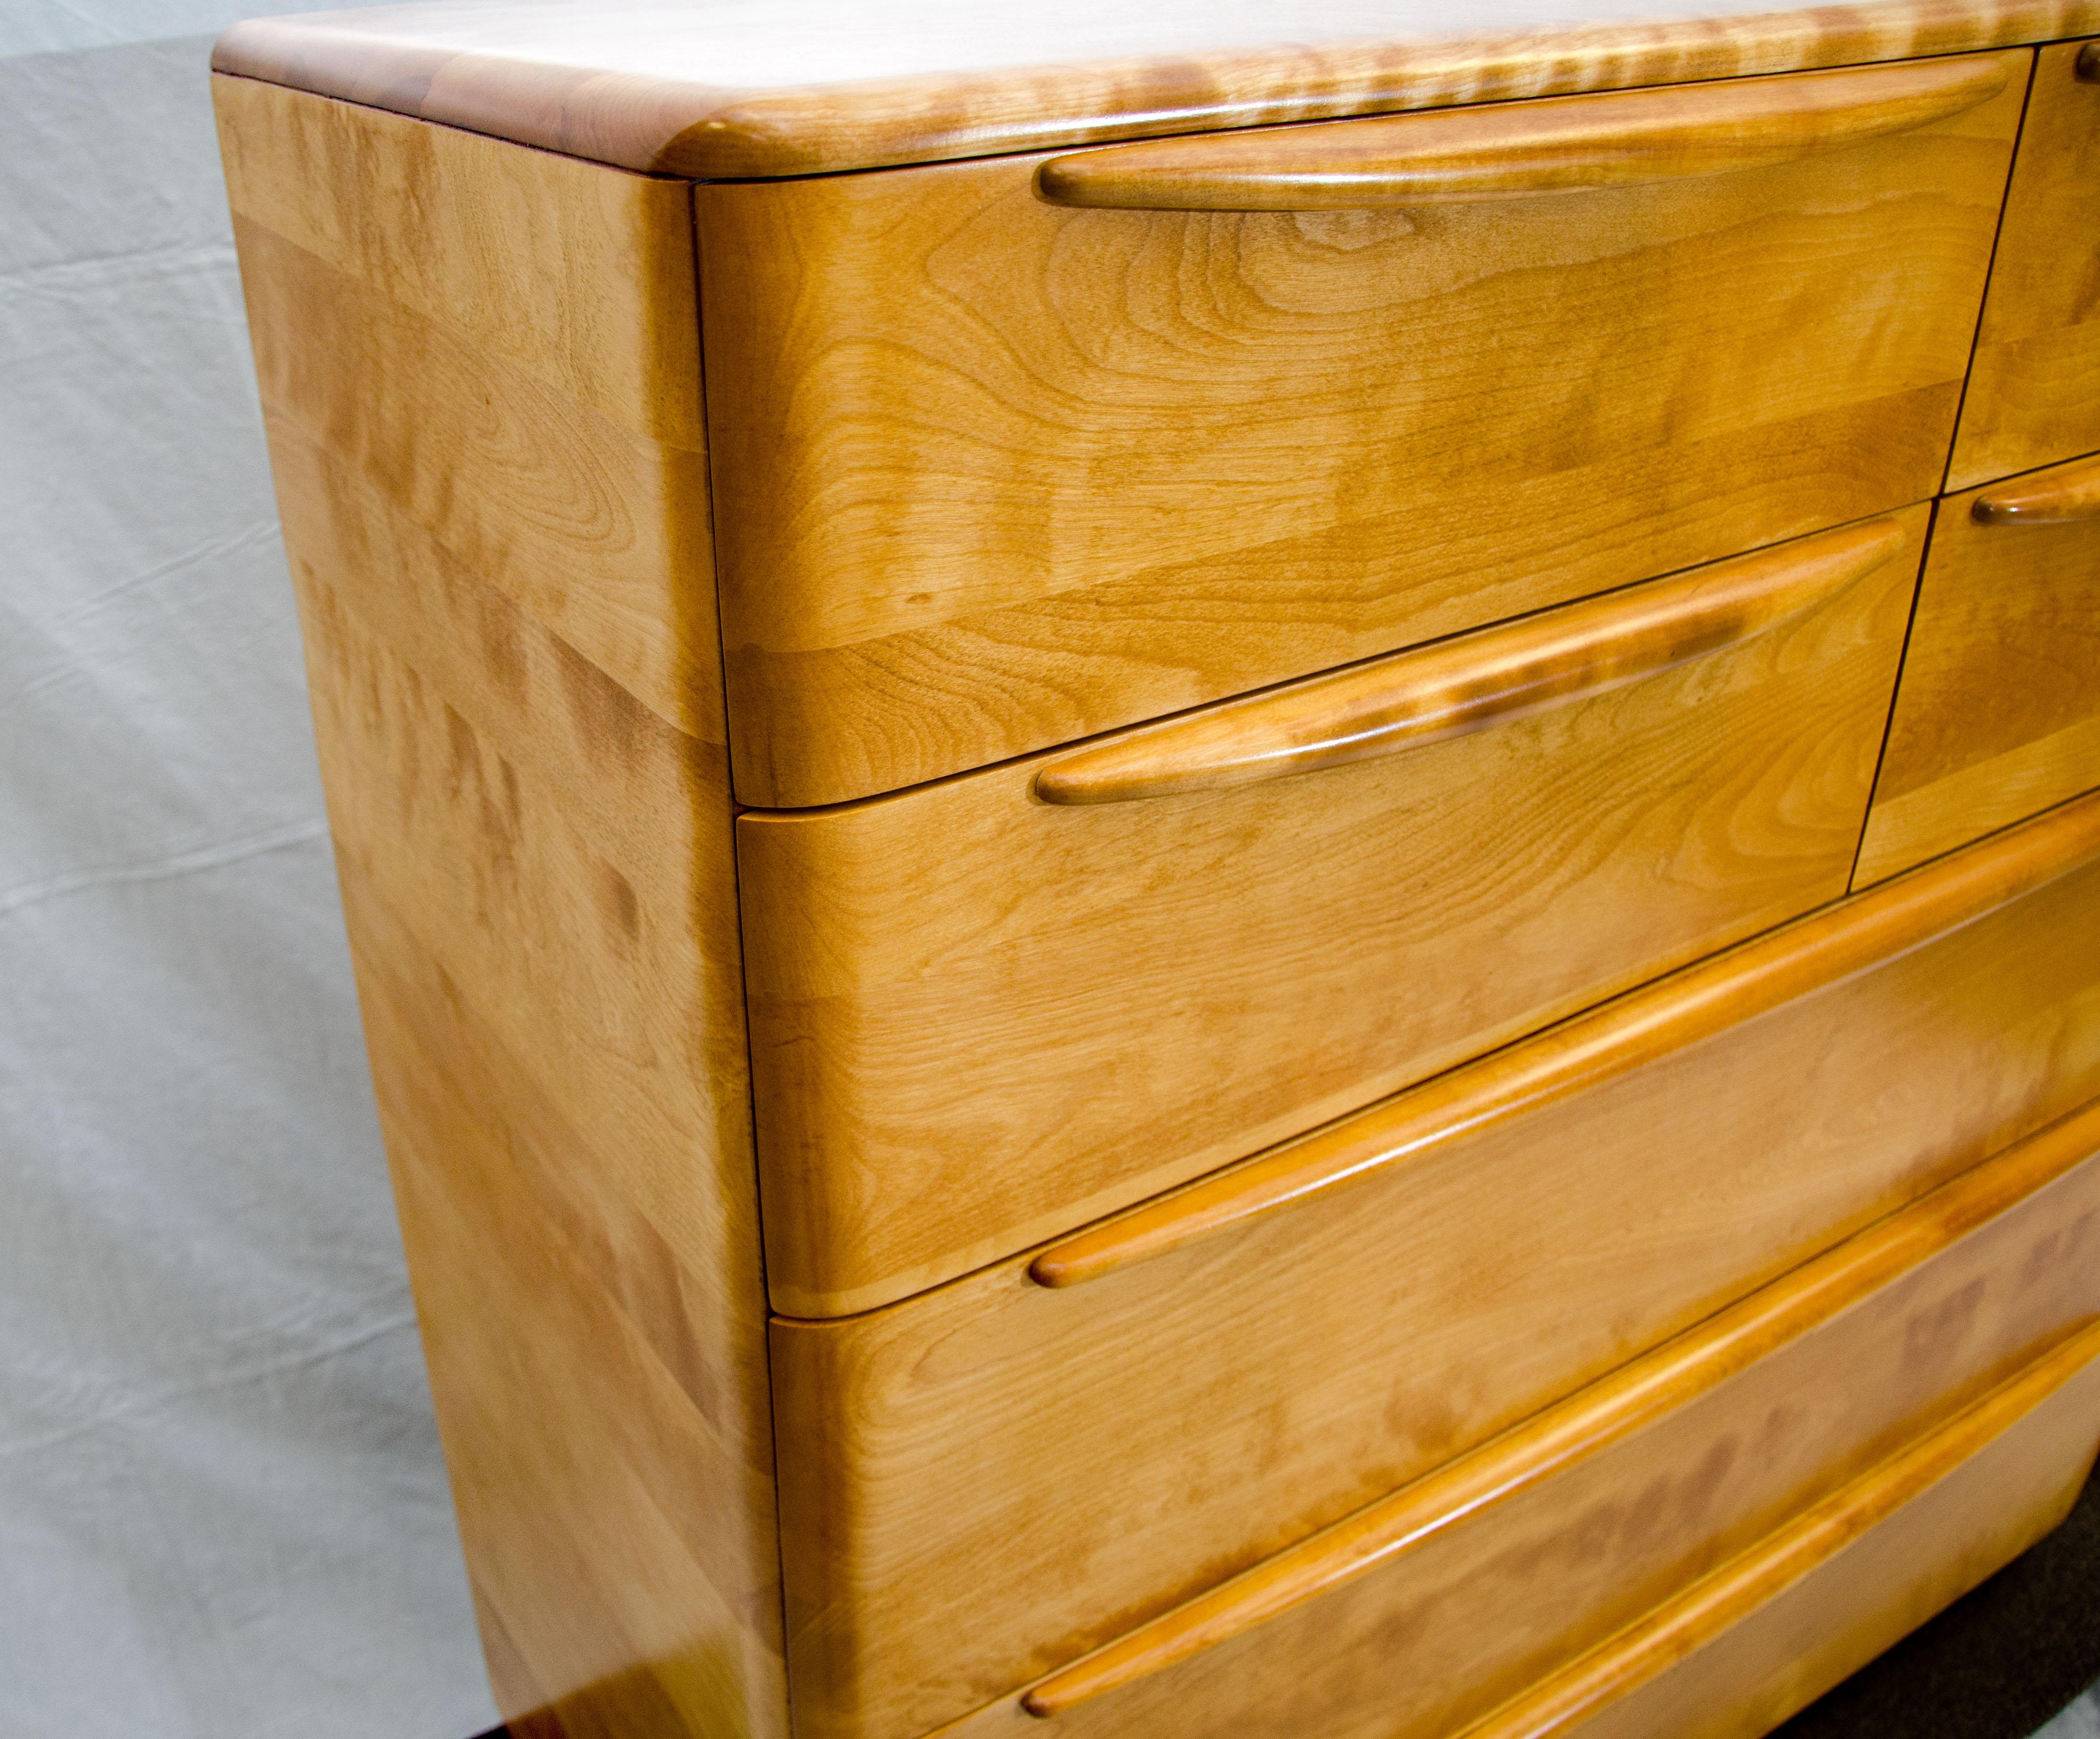 This is the rarest and largest Heywood Wakefield chest, it was manufactured for one year only 1954-1955. Needless to say, it has optimum storage available. The top four split drawers are 4 1/2